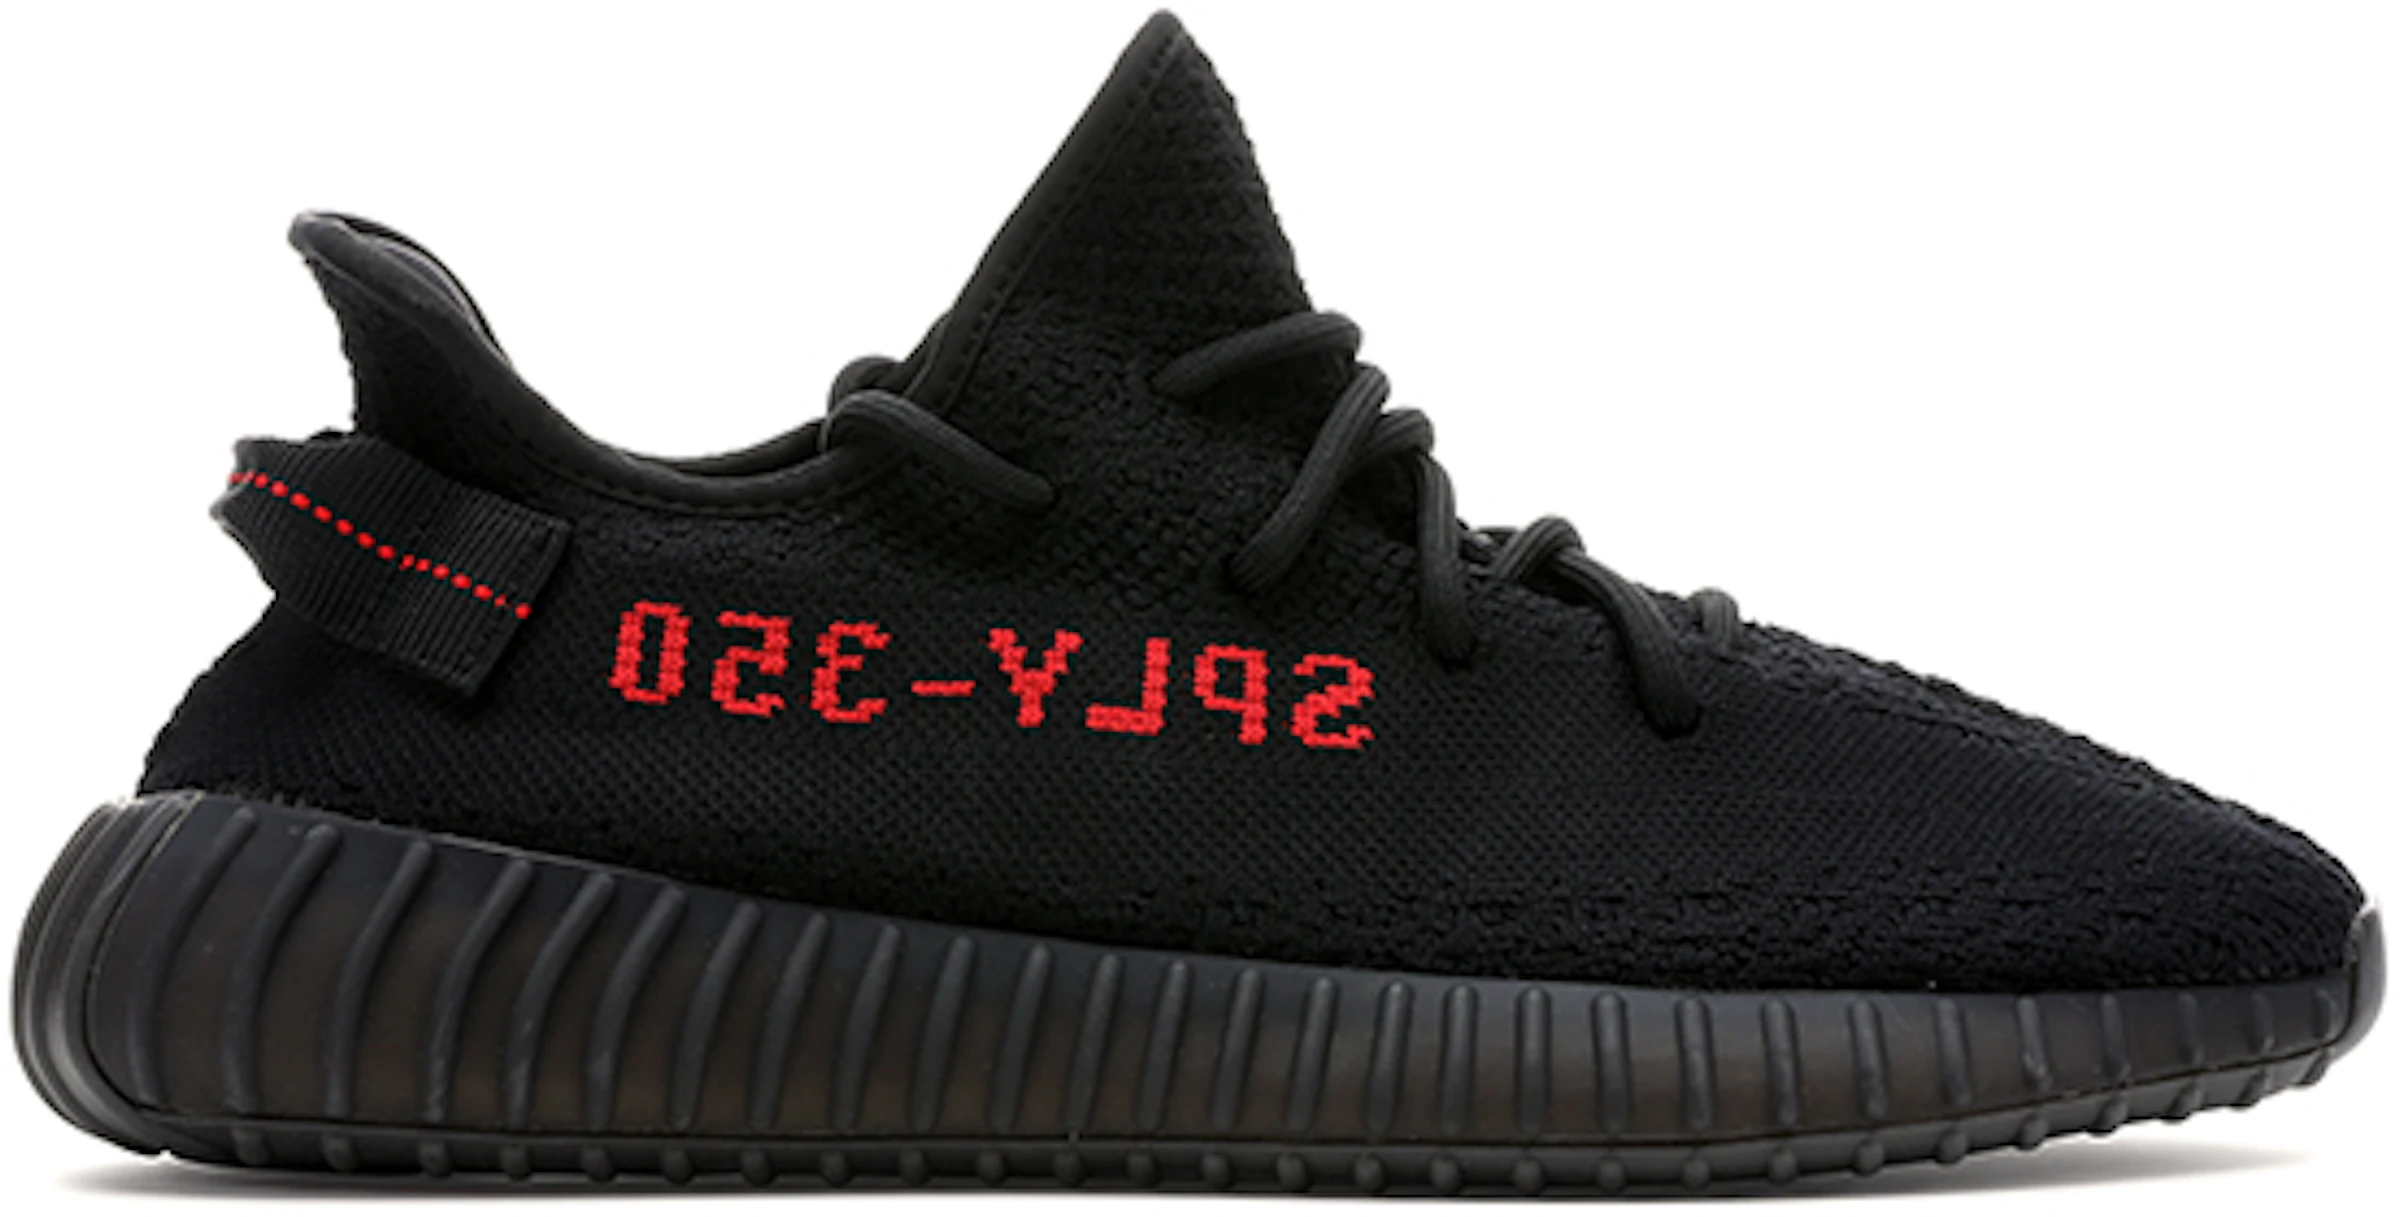 adidas Yeezy Boost 350 V2 Black Red (2017/2020) - CP9652 - US